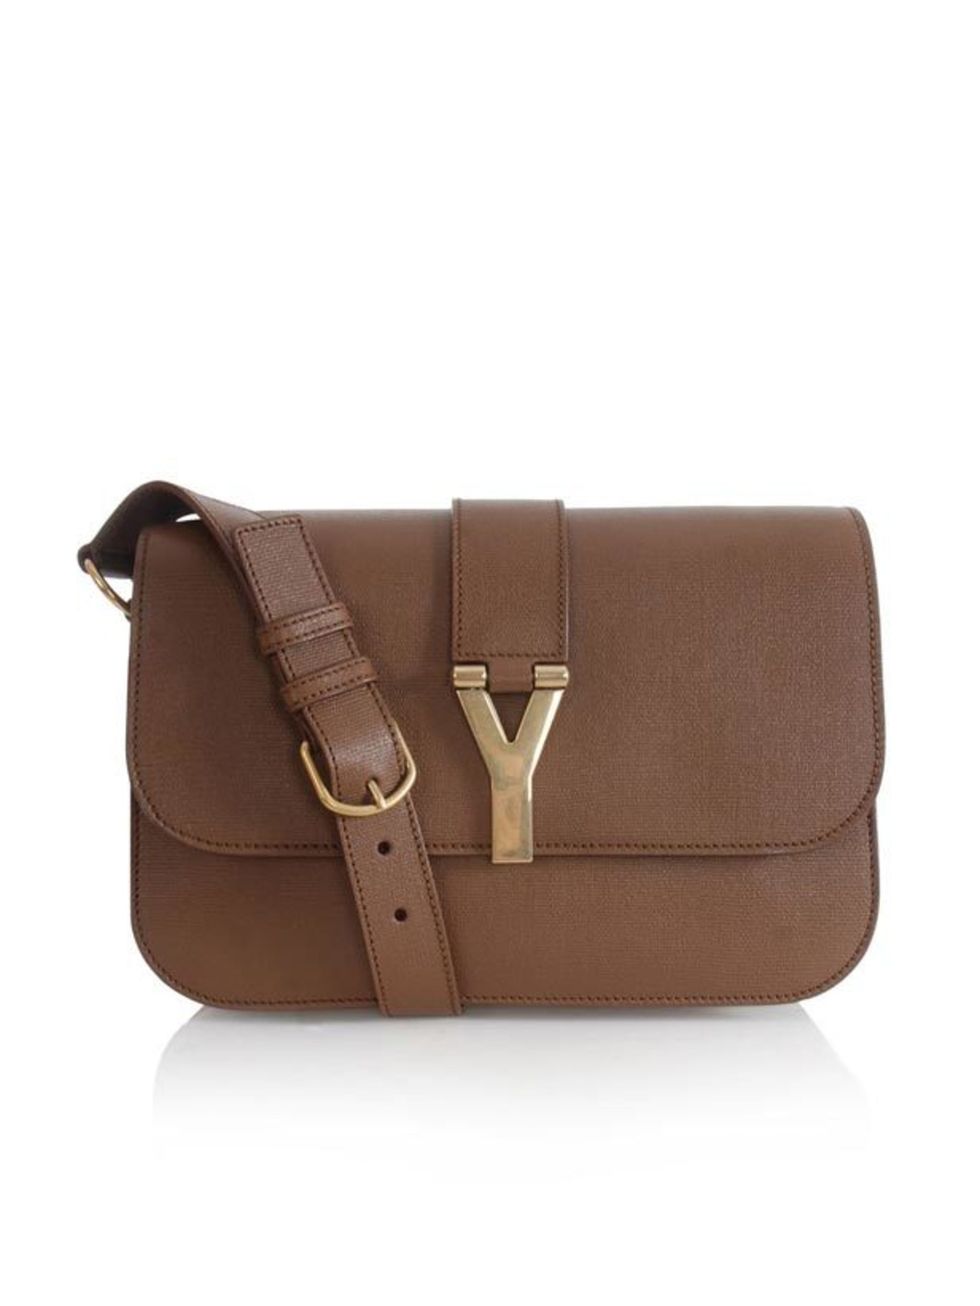 <p>Yves Saint Laurent brown leather shoulder bag, £1,195, at <a href="http://www.matchesfashion.com/fcp/product/Matches-Fashion//yves-saint-laurent-YSL-Y-247695-CDT0G-bags-BROWN/40222">Matches</a></p>